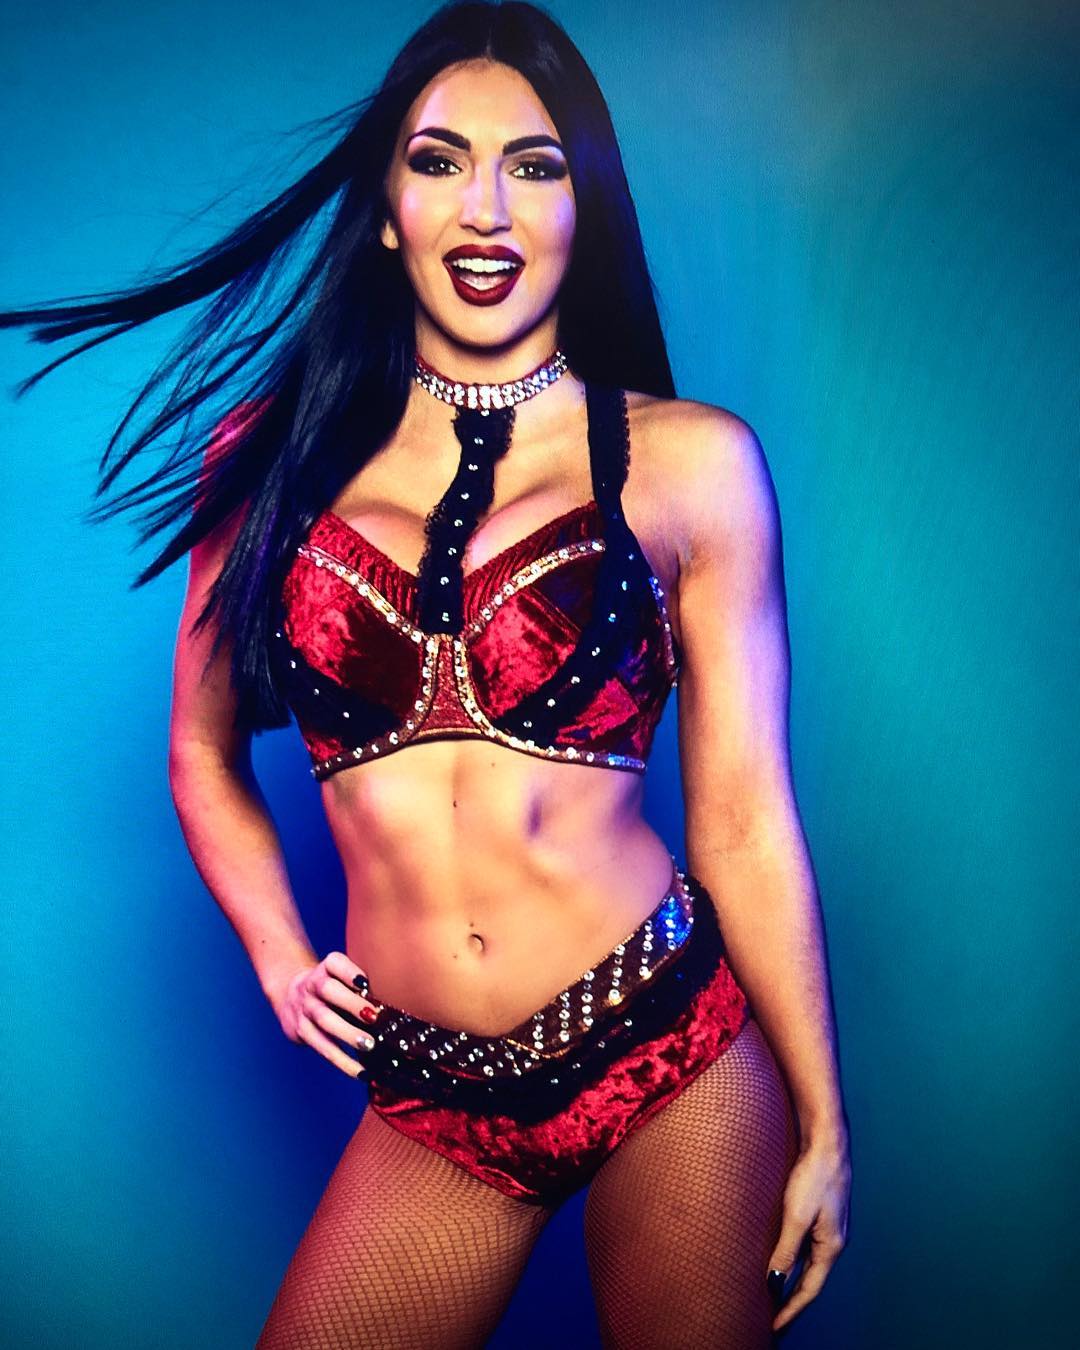 The Beautiful Billie Kay in a Hot Pose. WWE Diva Billie Kay's Hourglass Figure Is a Thing of Beauty. Events Photo Gallery. India.com Photogallery